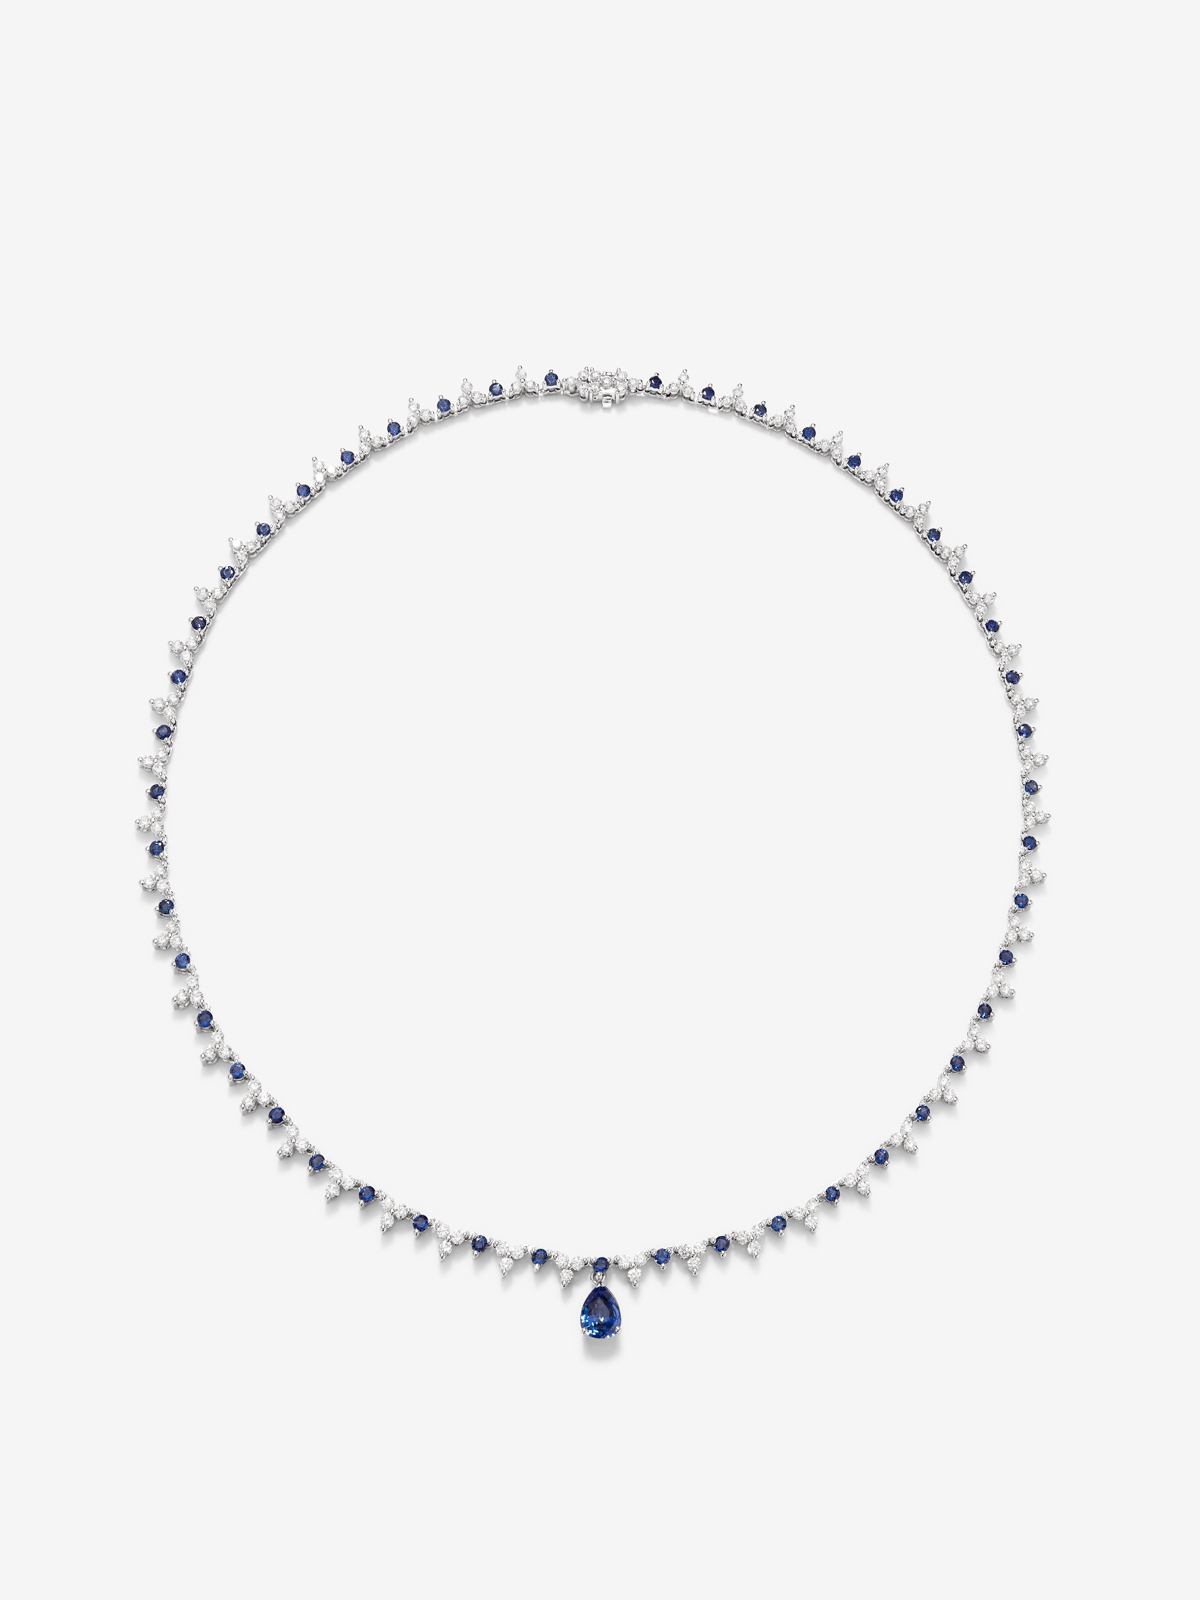 18K white gold necklace with Royal blue sapphire in 1.25 cts pear size, blue sapphires in 2.96 and white diamonds in bright size of 4.27 cts